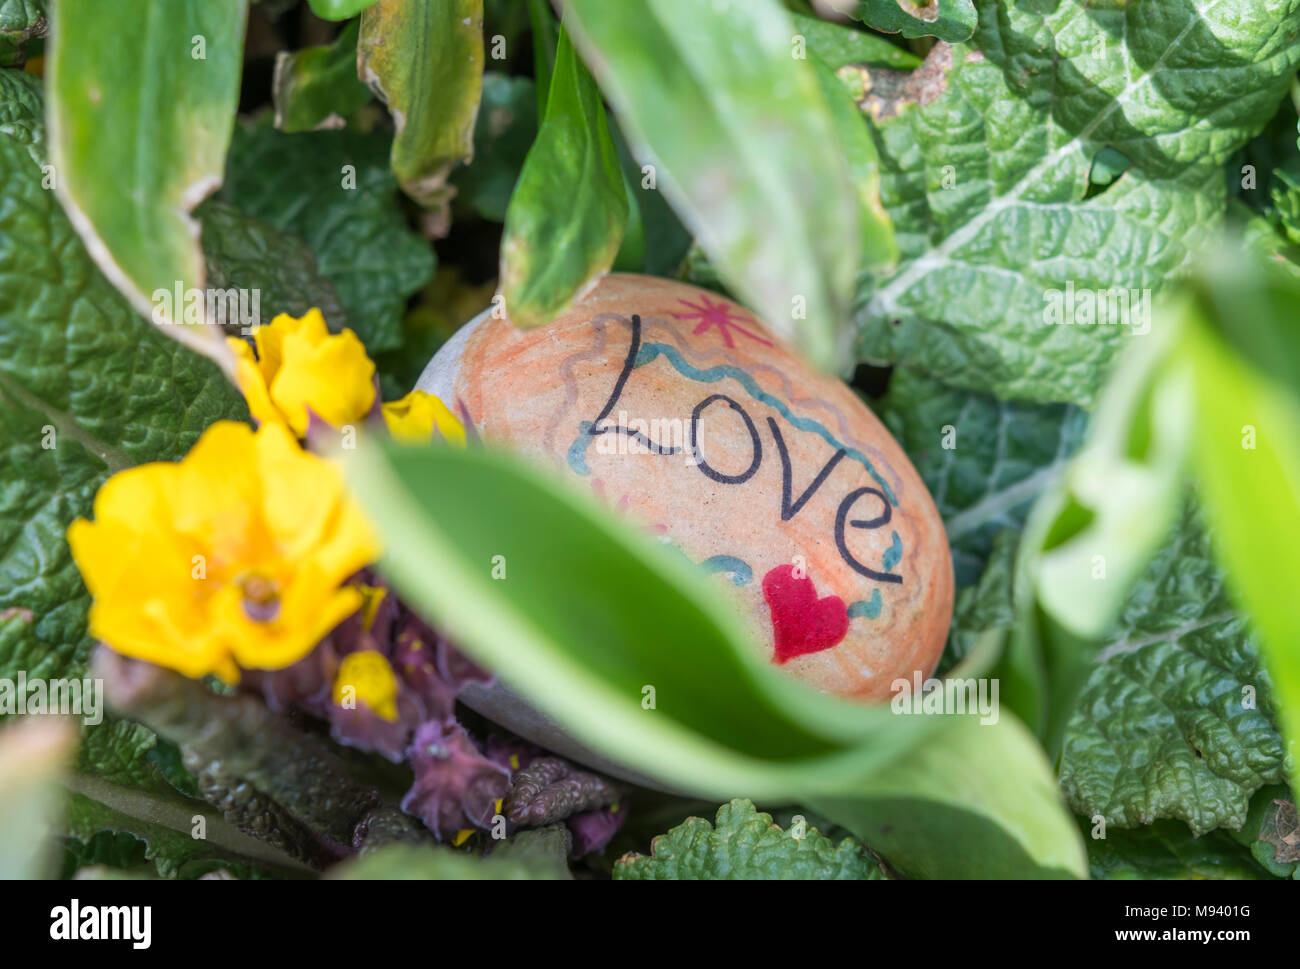 Stone painted with a love heart laying in a garden. Stone art. Stock Photo